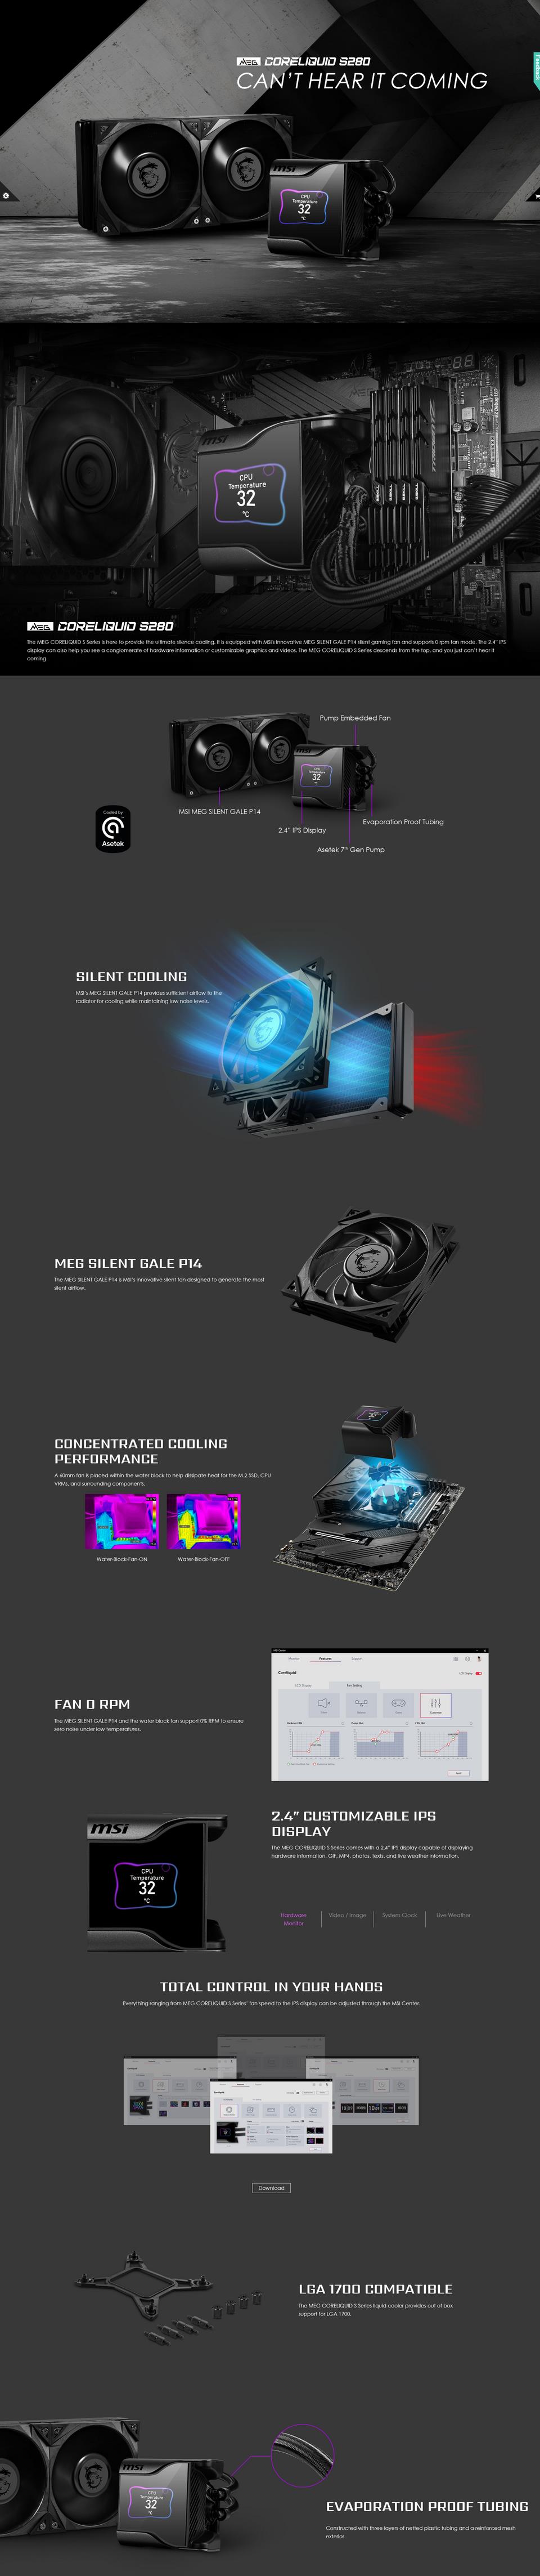 A large marketing image providing additional information about the product MSI MEG CoreLiquid S280 280mm AIO CPU Cooler - Additional alt info not provided